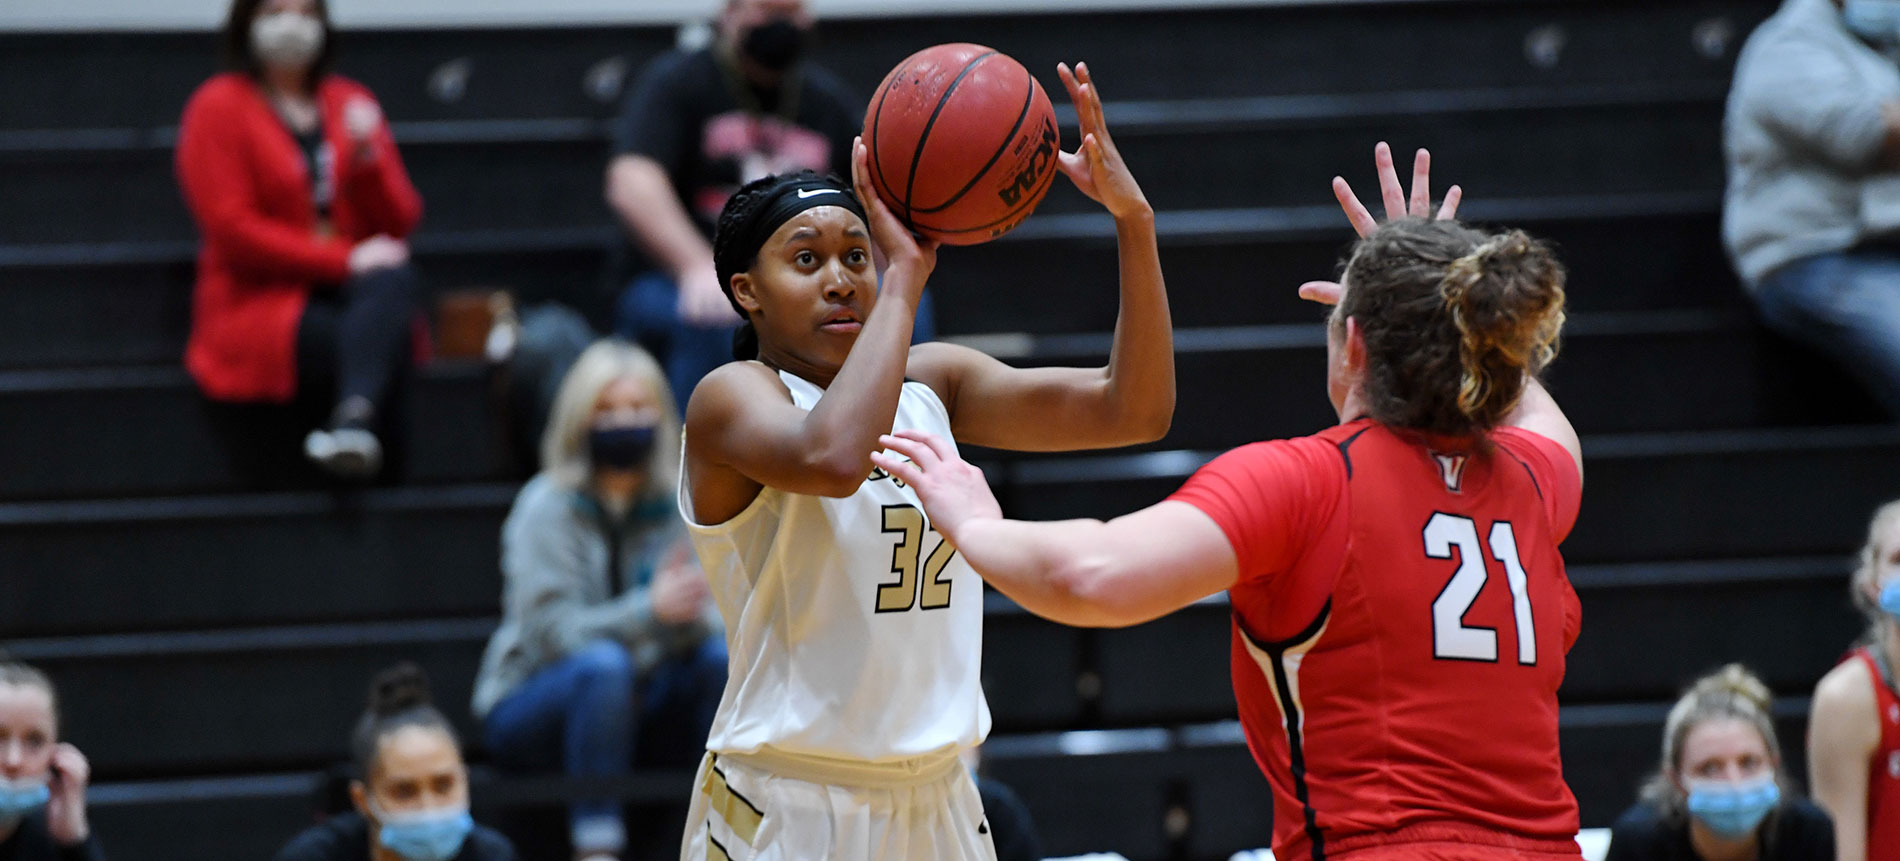 Trojans Could Not Overcome Slow Start in Home Loss Against Catawba; 64-47